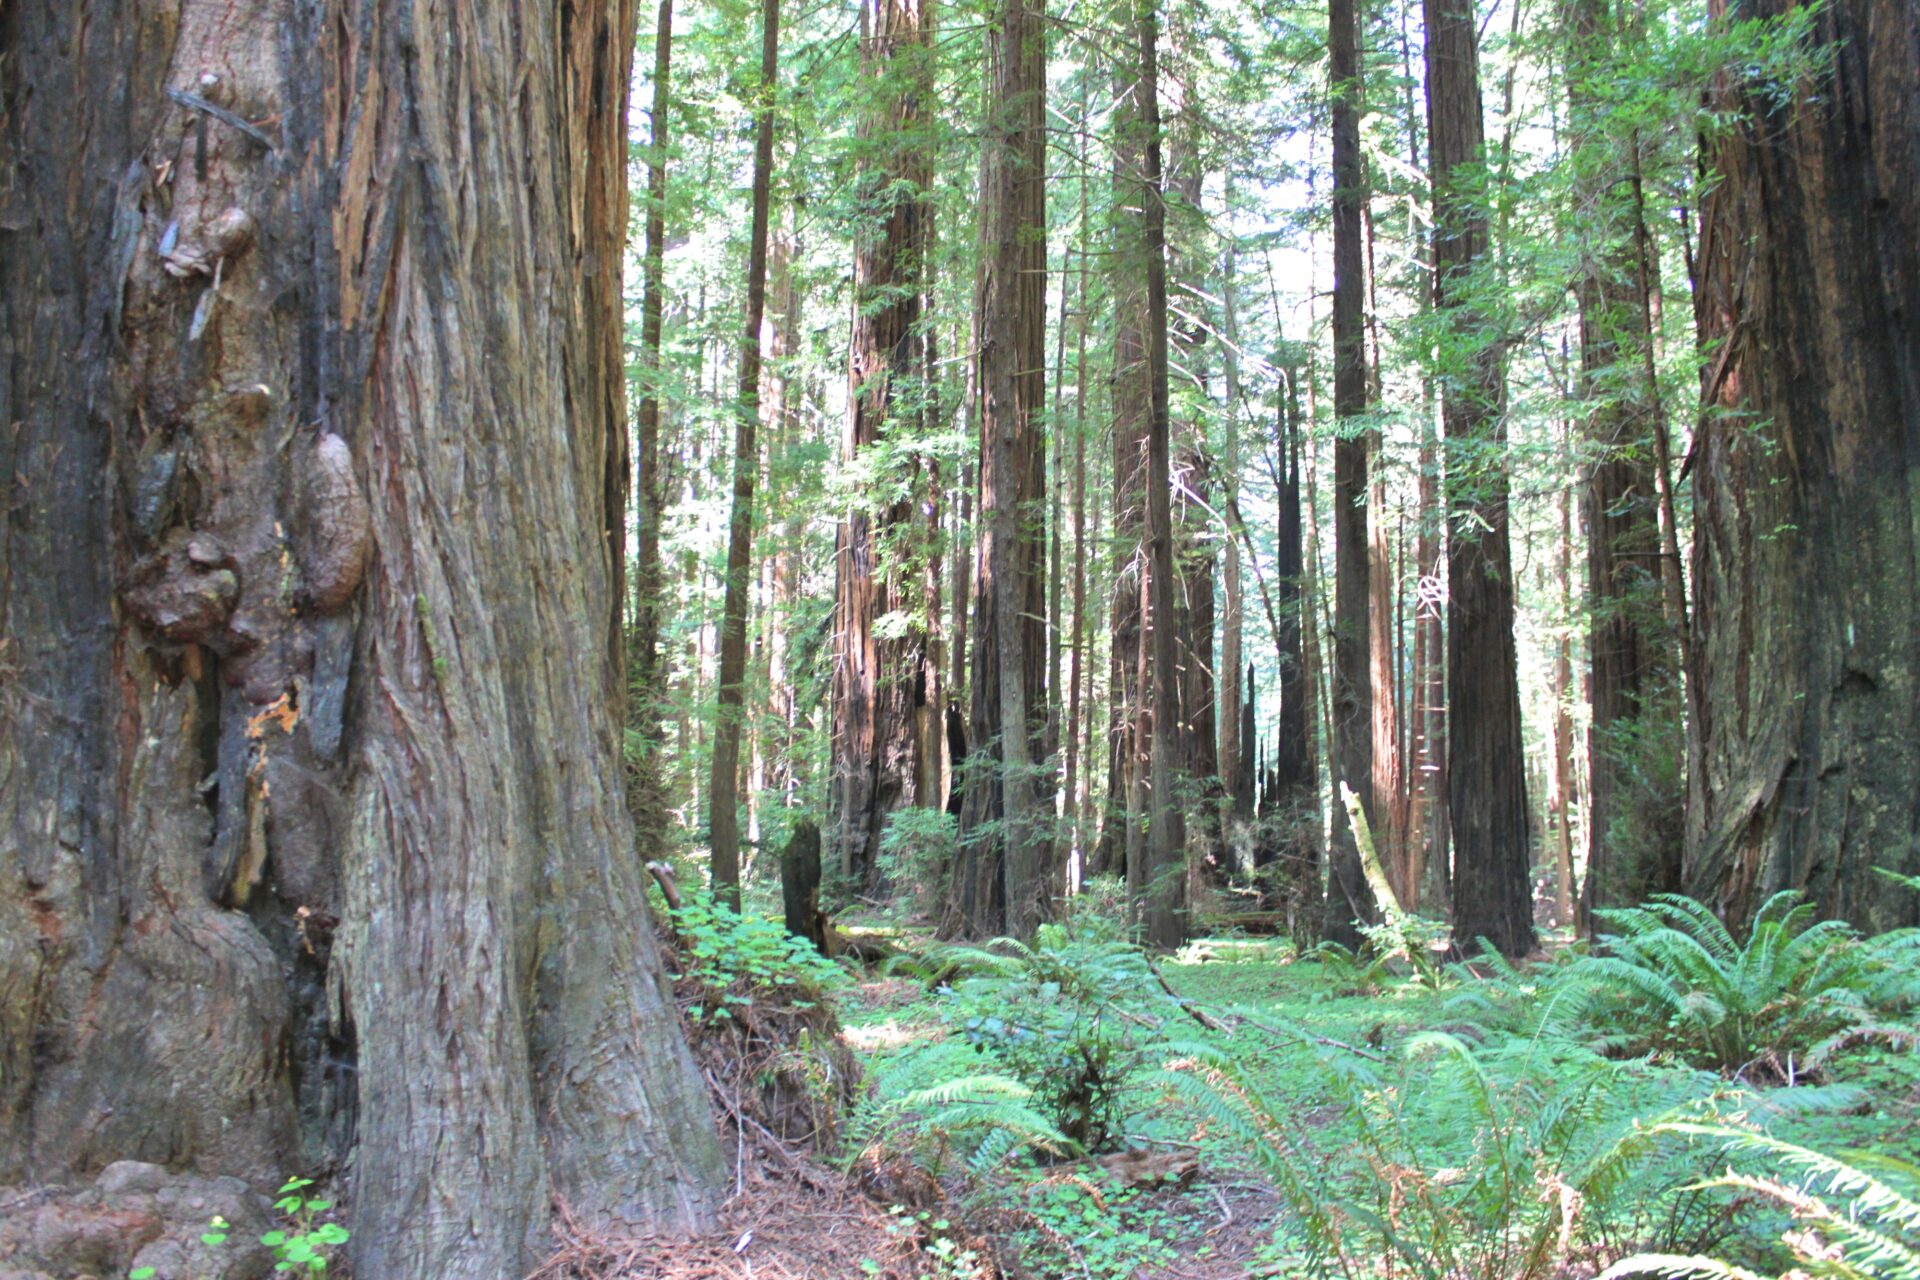 Humboldt Redwoods State Park & The Avenue of the Giants: Where the REAL Ones Are